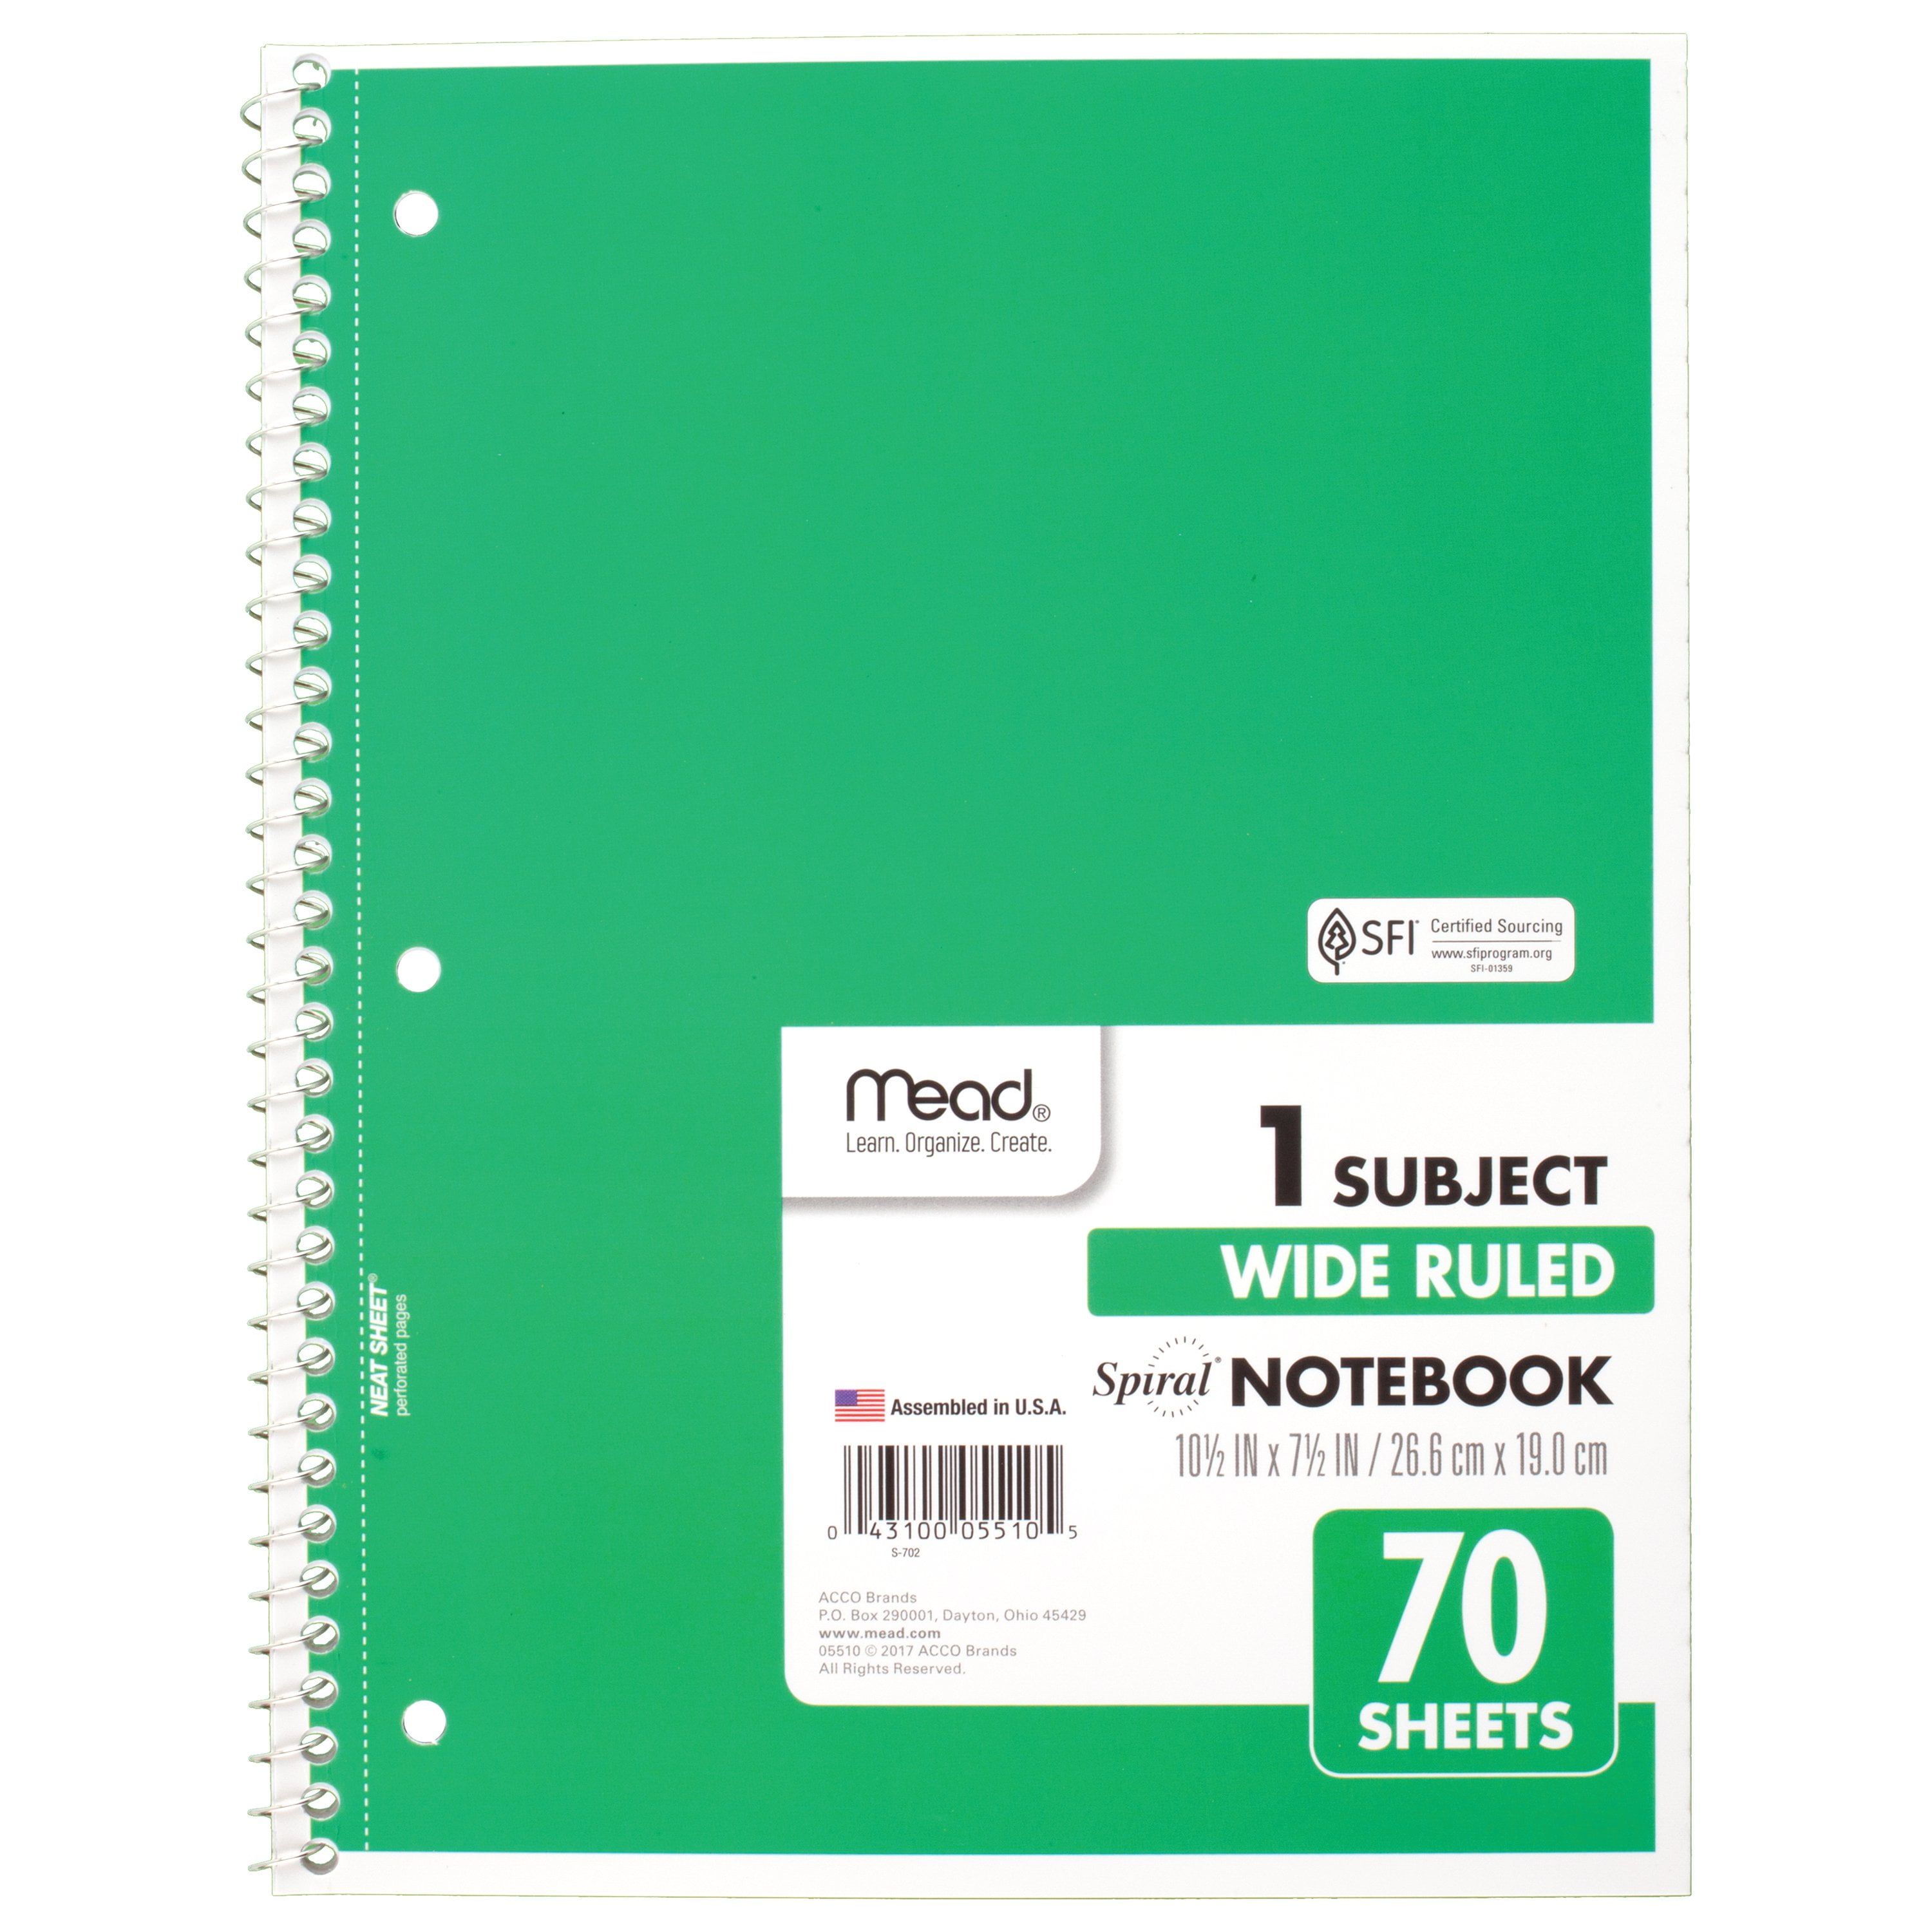 70 Sheets 10-1/2" x 7-1/ Mead Spiral Notebooks College Ruled Paper 1 Subject 